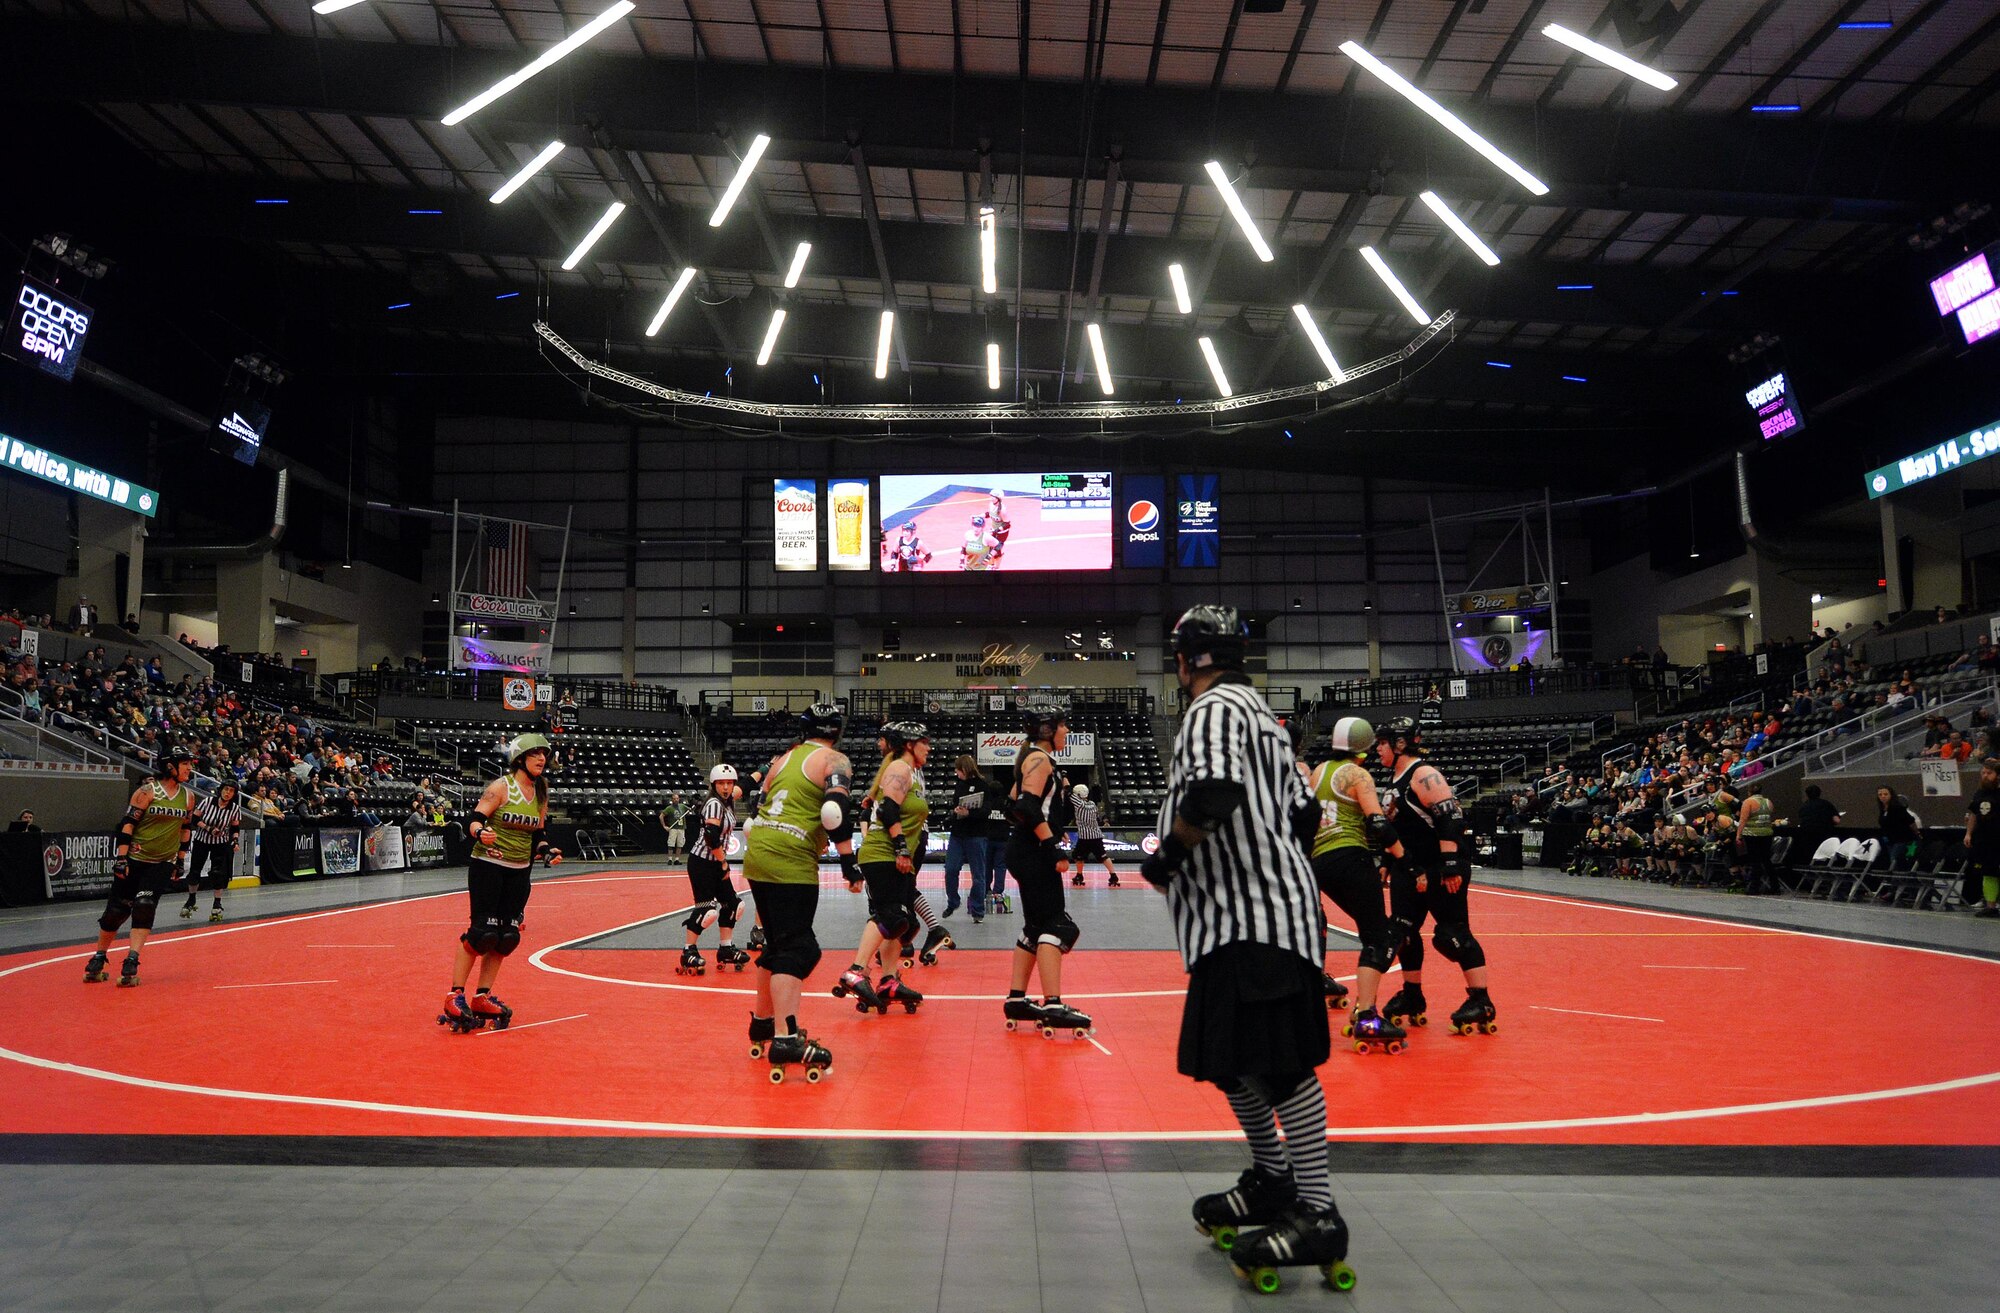 The Omaha Rollergirls take on the Sioux City Roller Dames in a bout held at the Ralston Arena, Neb., March 26, 2016. One of the All-Star jammers of the Rollergirls in an executive officer with the 55th Wing Headquarters known as Maj. Jocelyn Smith, but by night, Amelia Airhurt.  (U.S. Air Force photo by Josh Plueger/Released)